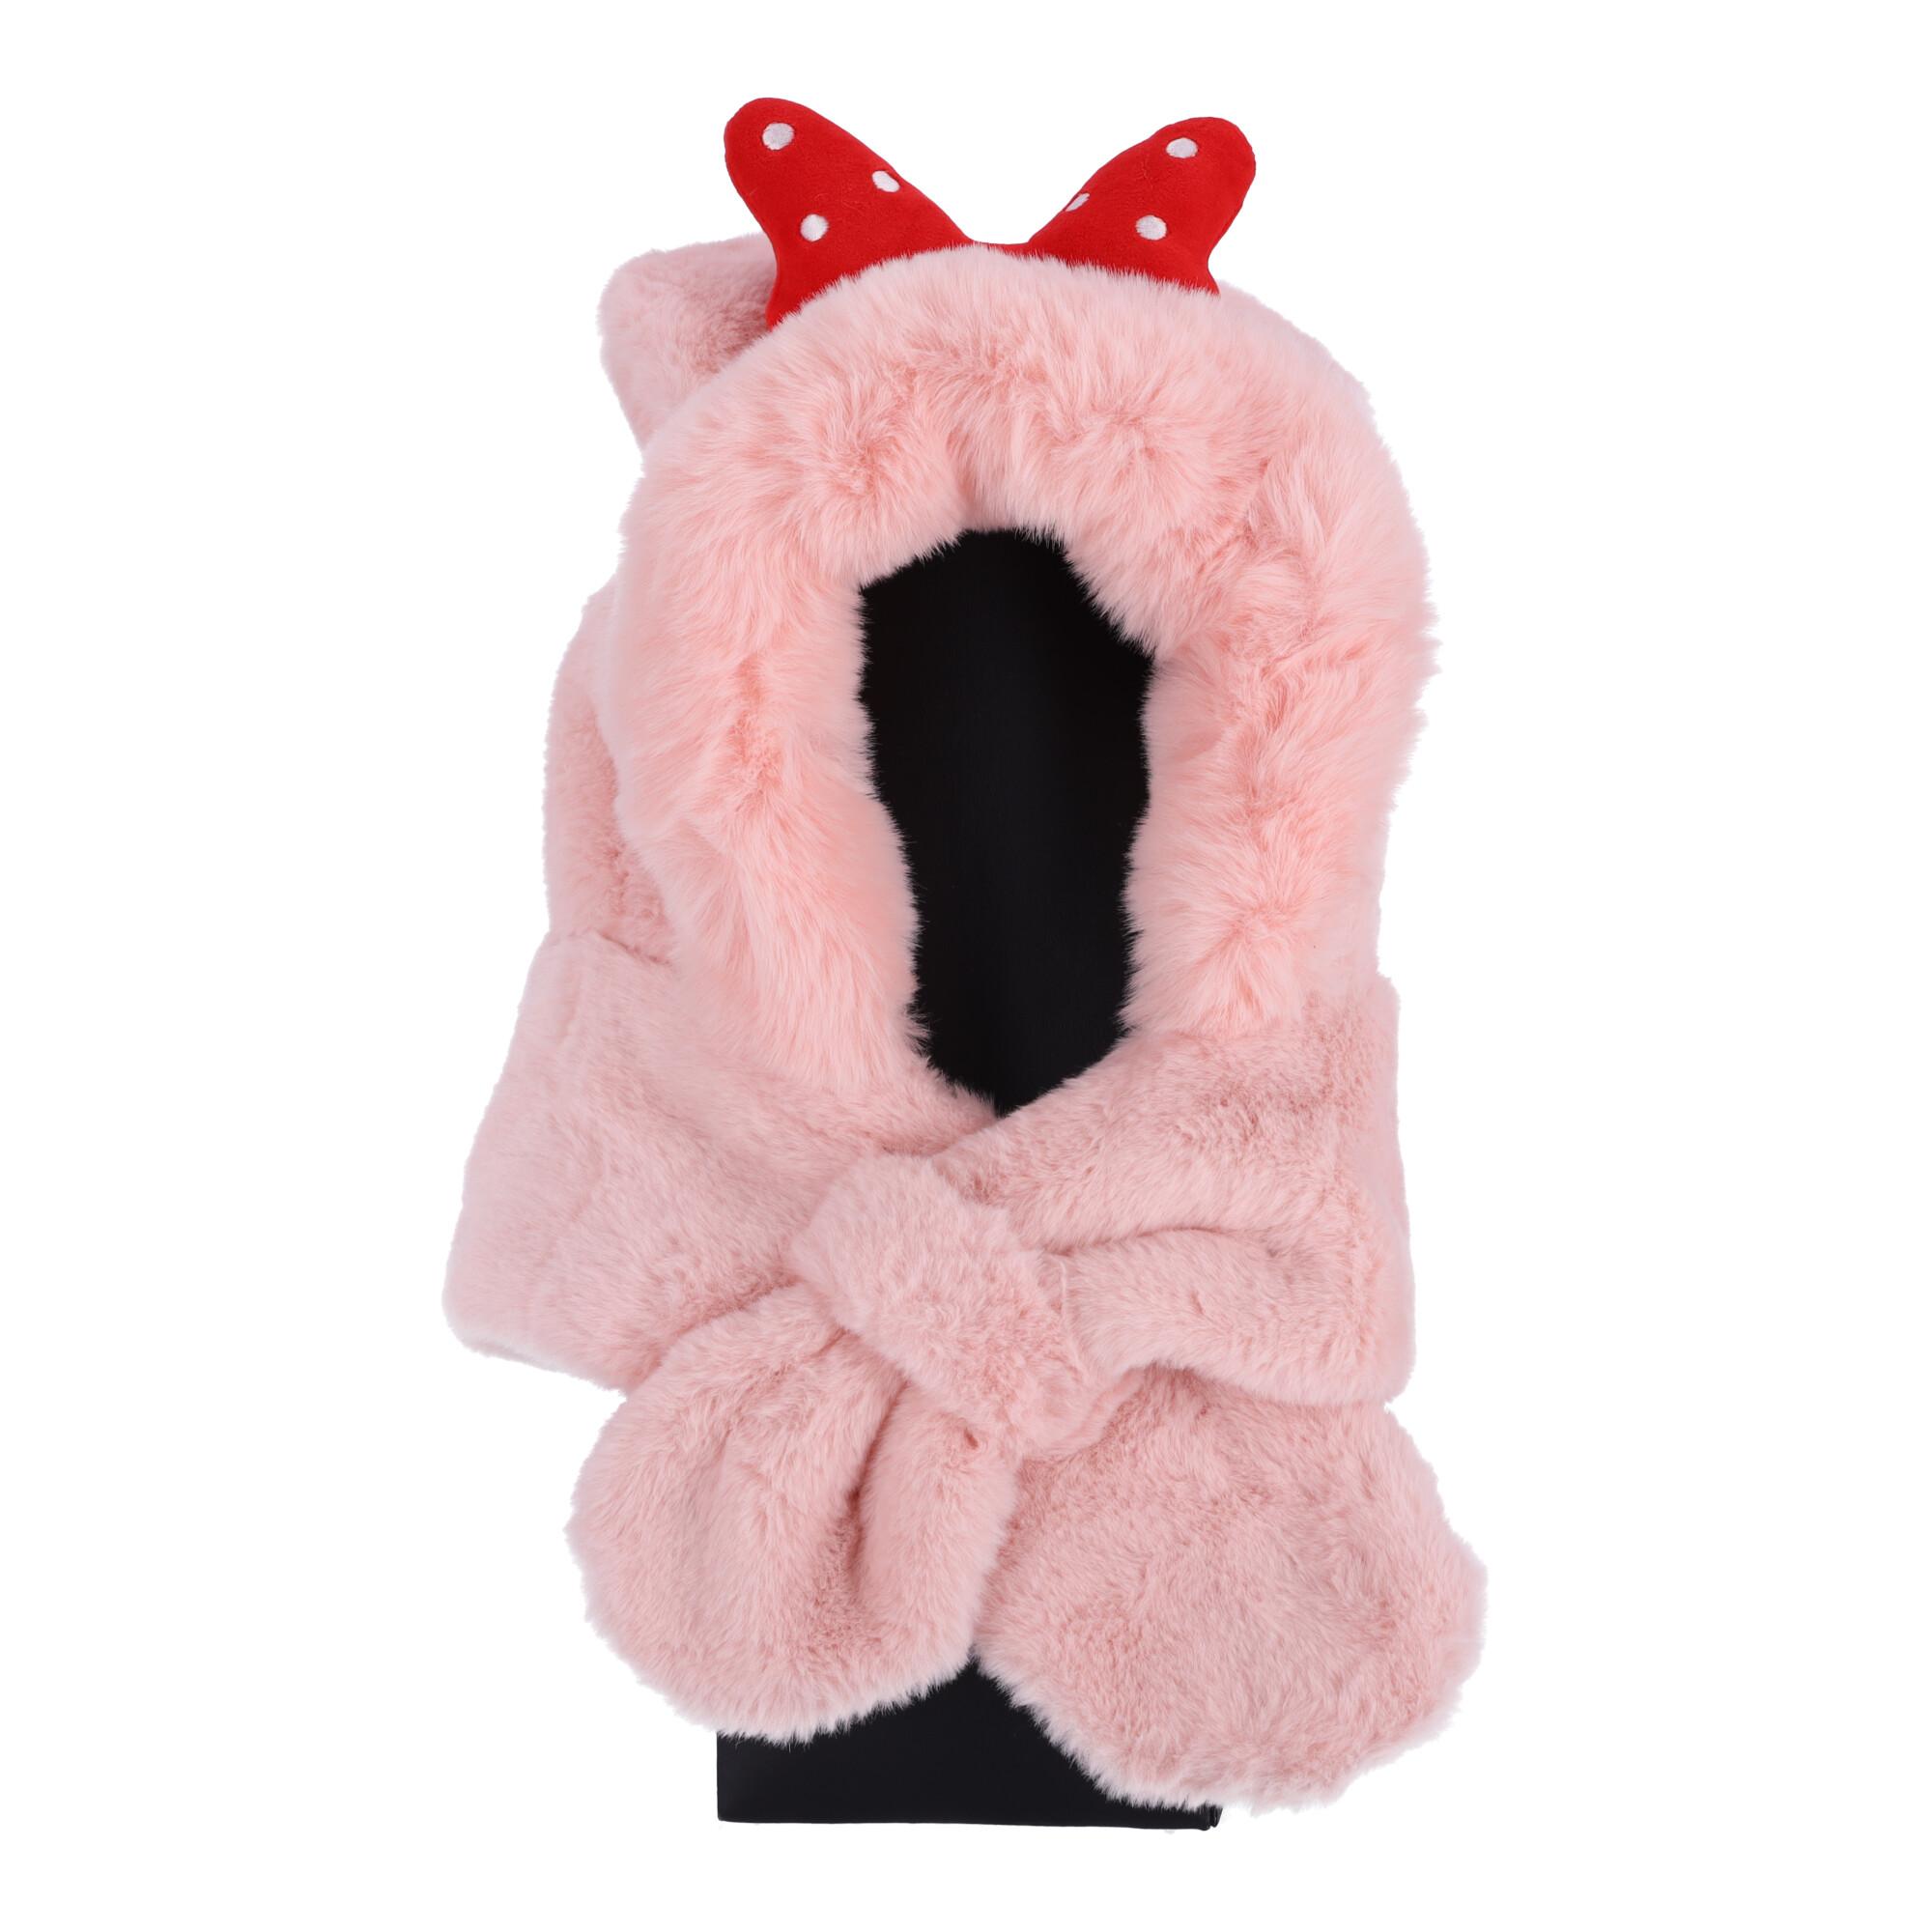 Children's plush hat with a scarf for children aged 1 to 8 - pink with a red bow